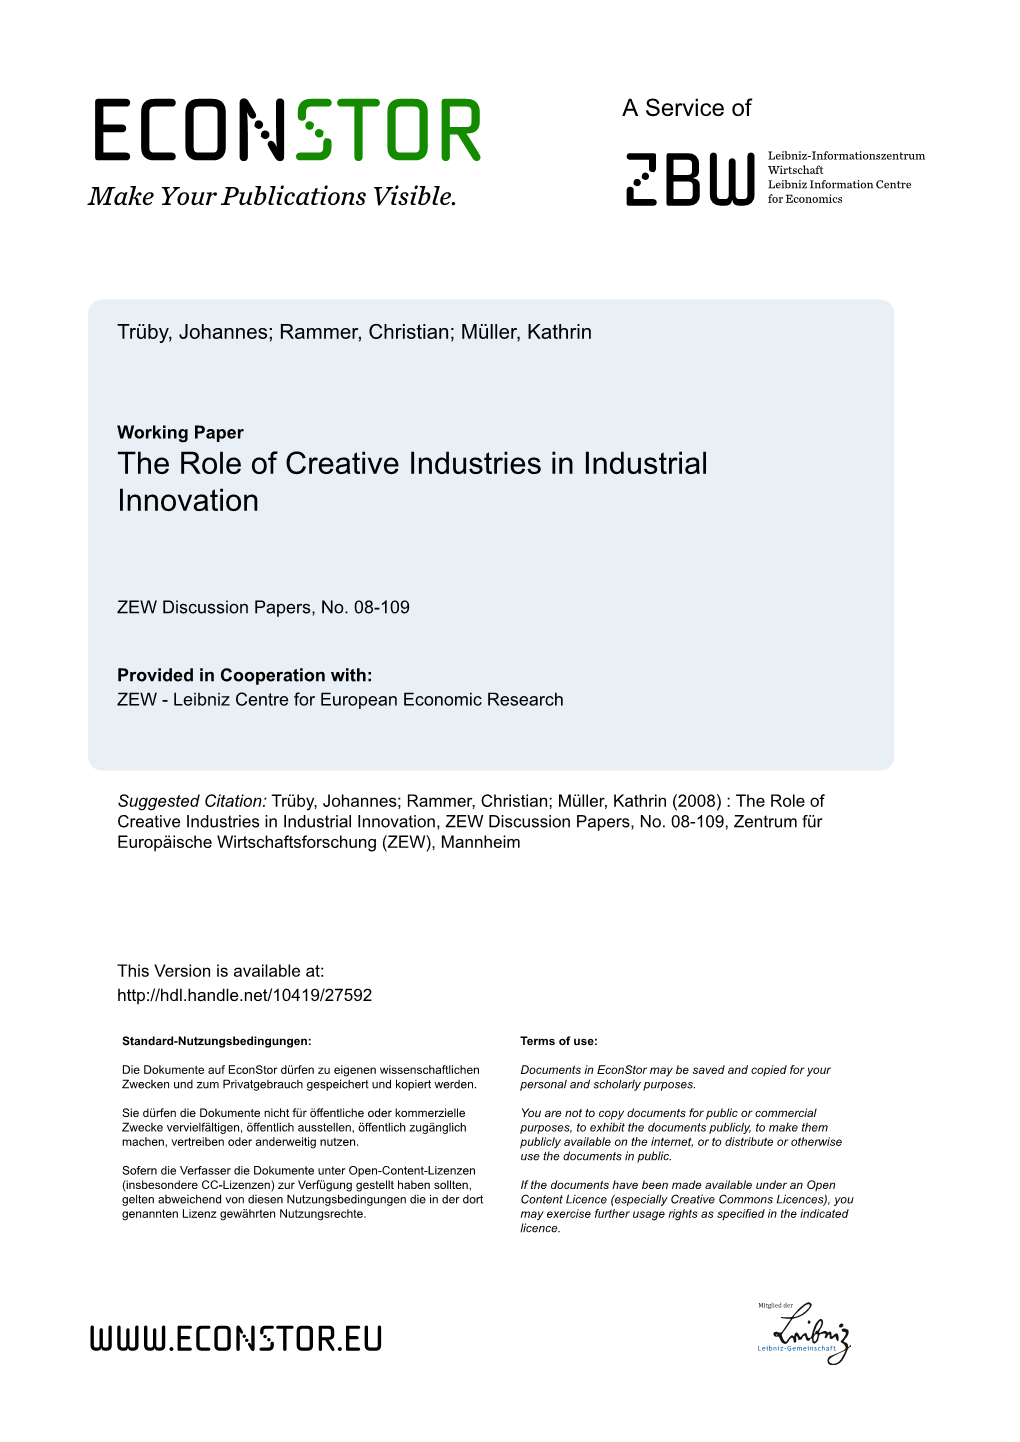 The Role of Creative Industries in Industrial Innovation